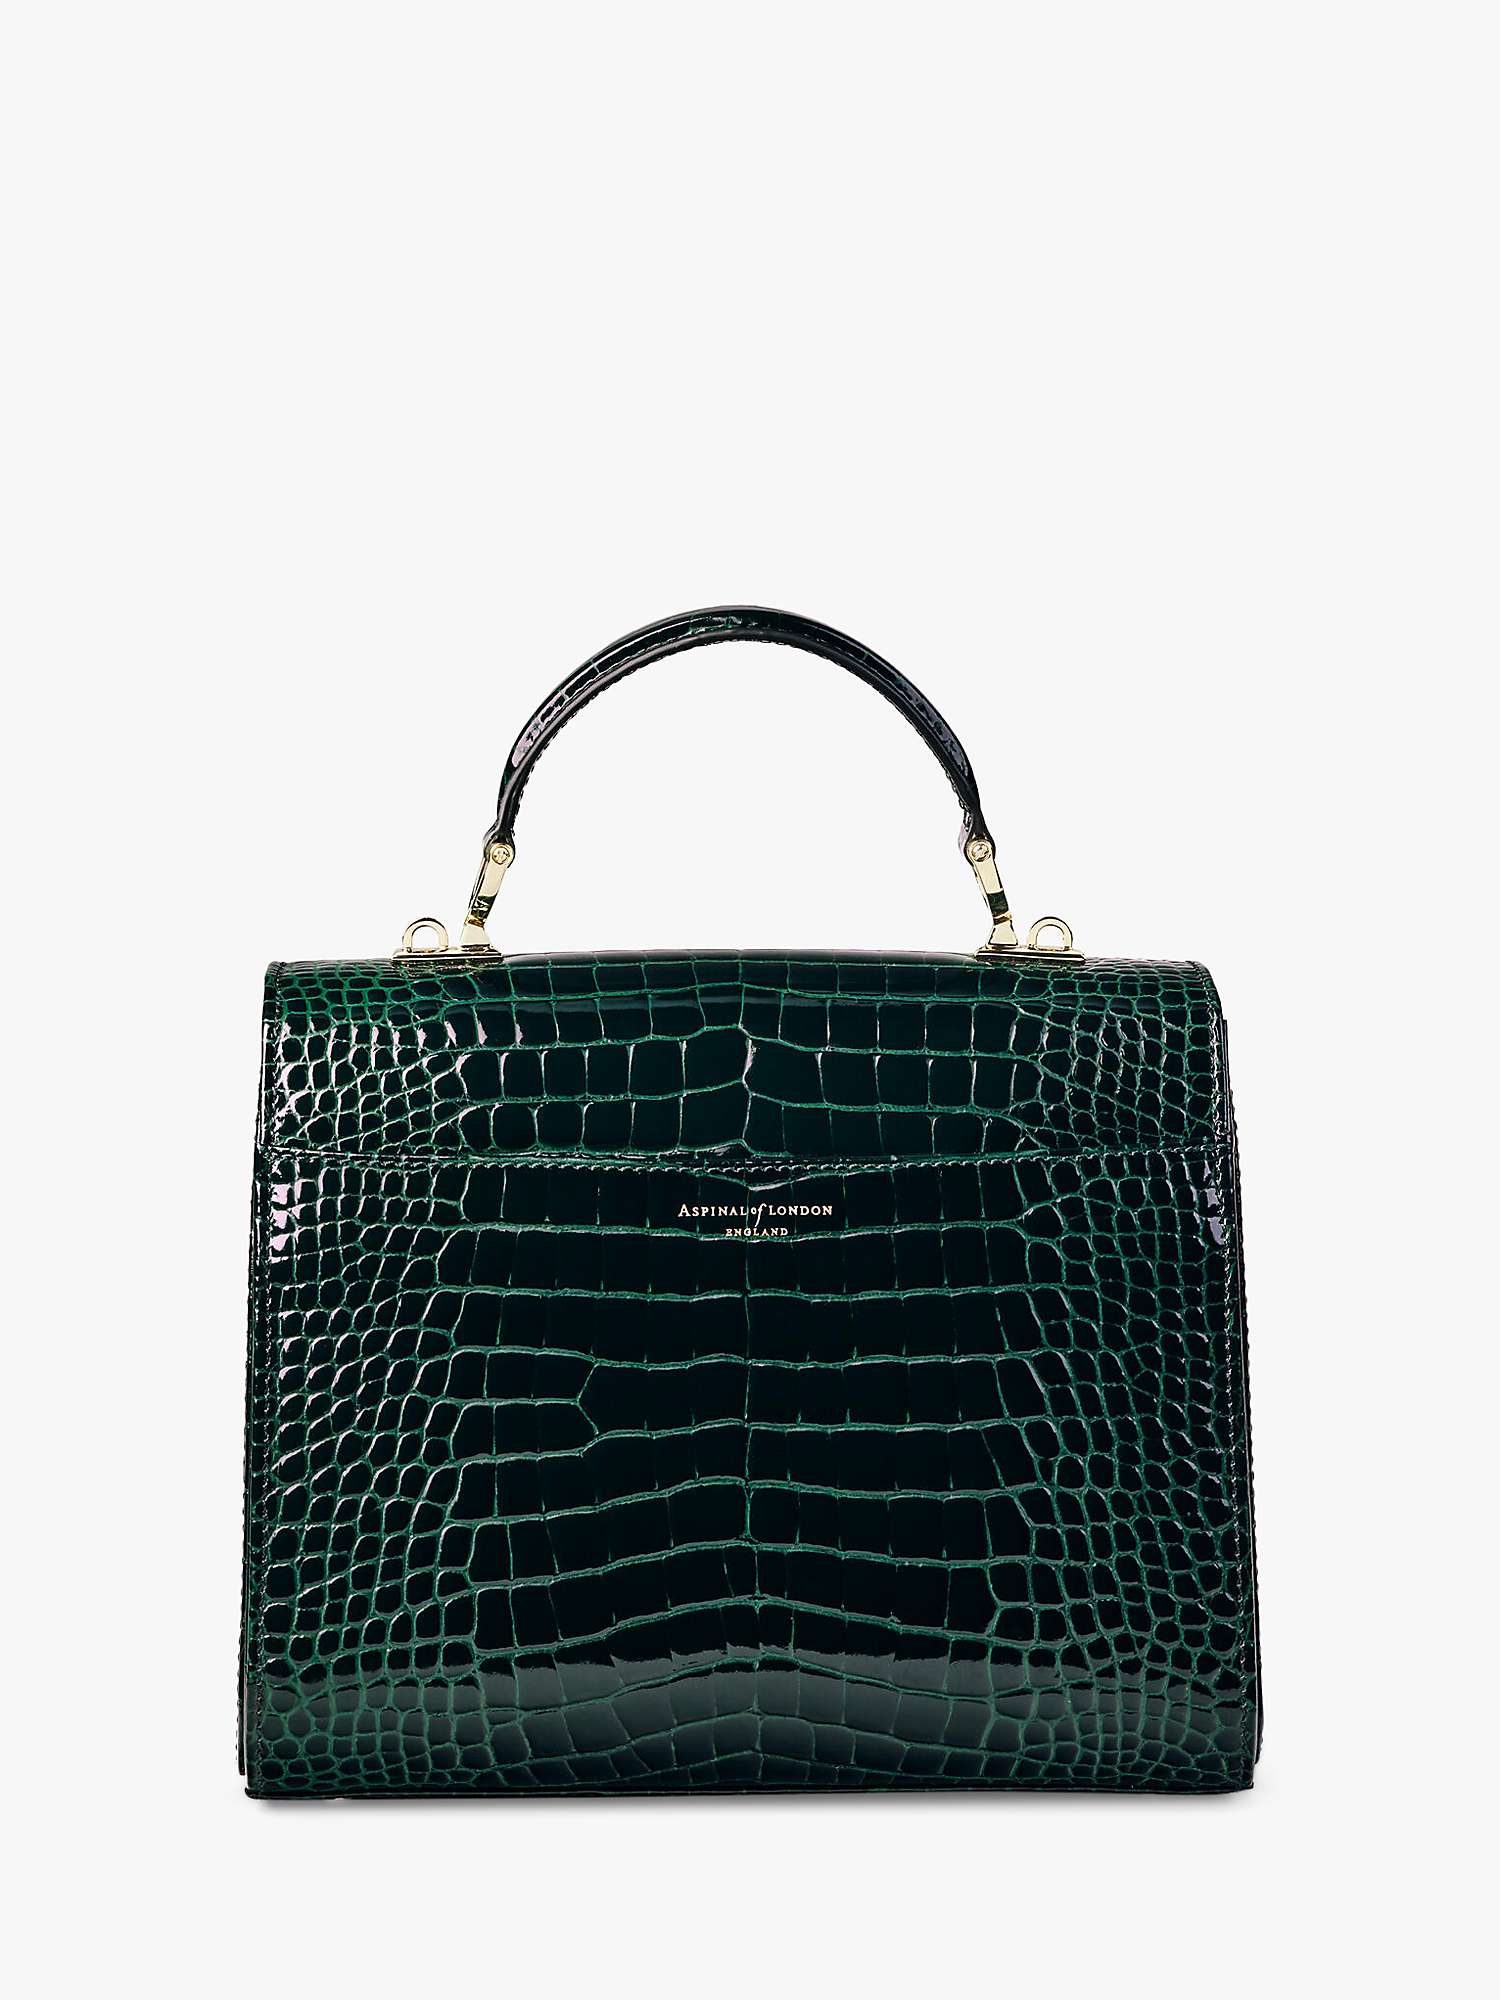 Buy Aspinal of London Mayfair Croc Leather Cross Body Bag Online at johnlewis.com